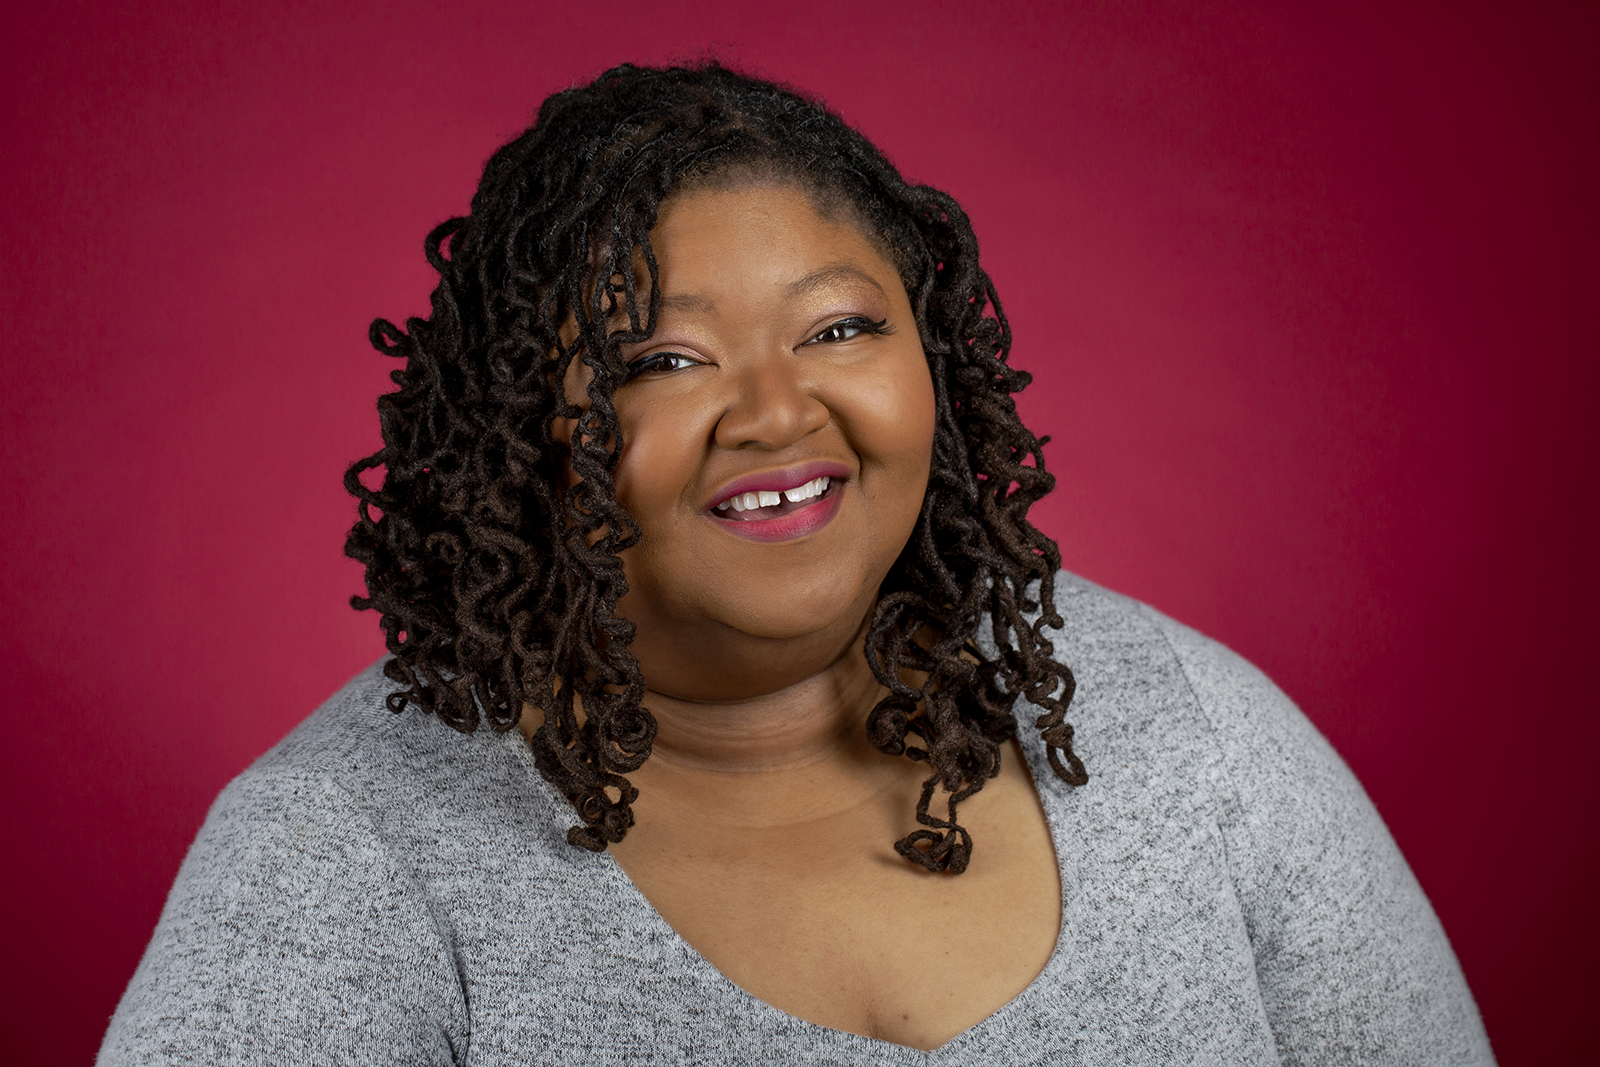 portrait of a Black woman on a red background